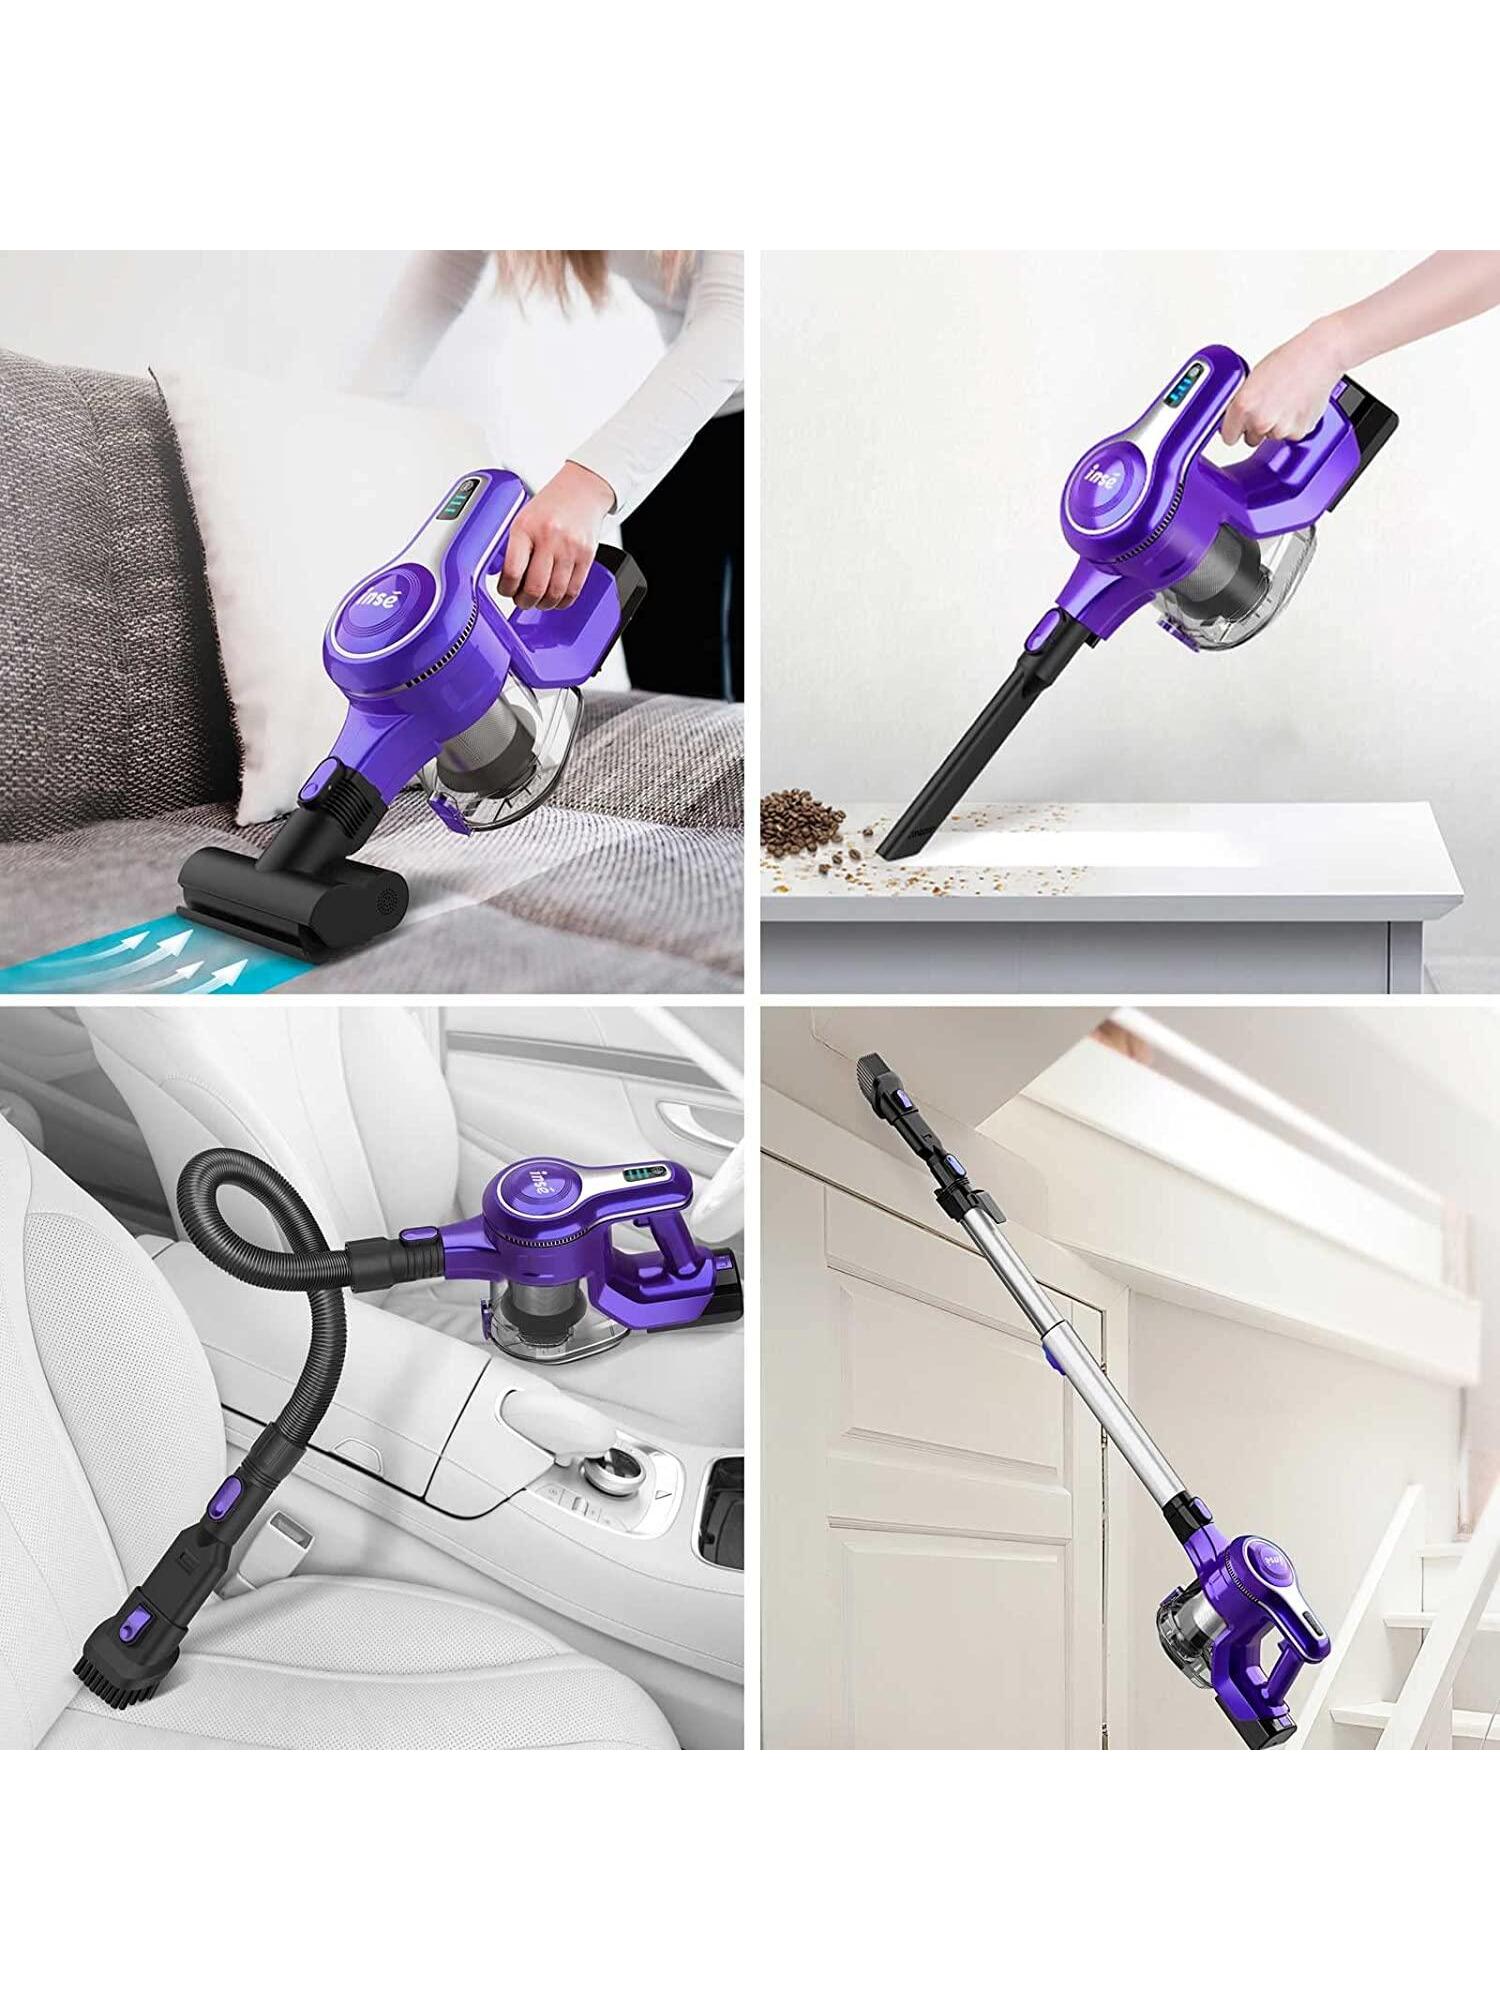 INSE S6 Cordless Vacuum Cleaner, 10 in 1 28KPa 300W Powerful Stick Vacuum, Rechargeable Cordless Vacuum, Up to 45min Runtime, Lightweight Vacuum Cleaner for Carpet Hard Floor Pet Hair